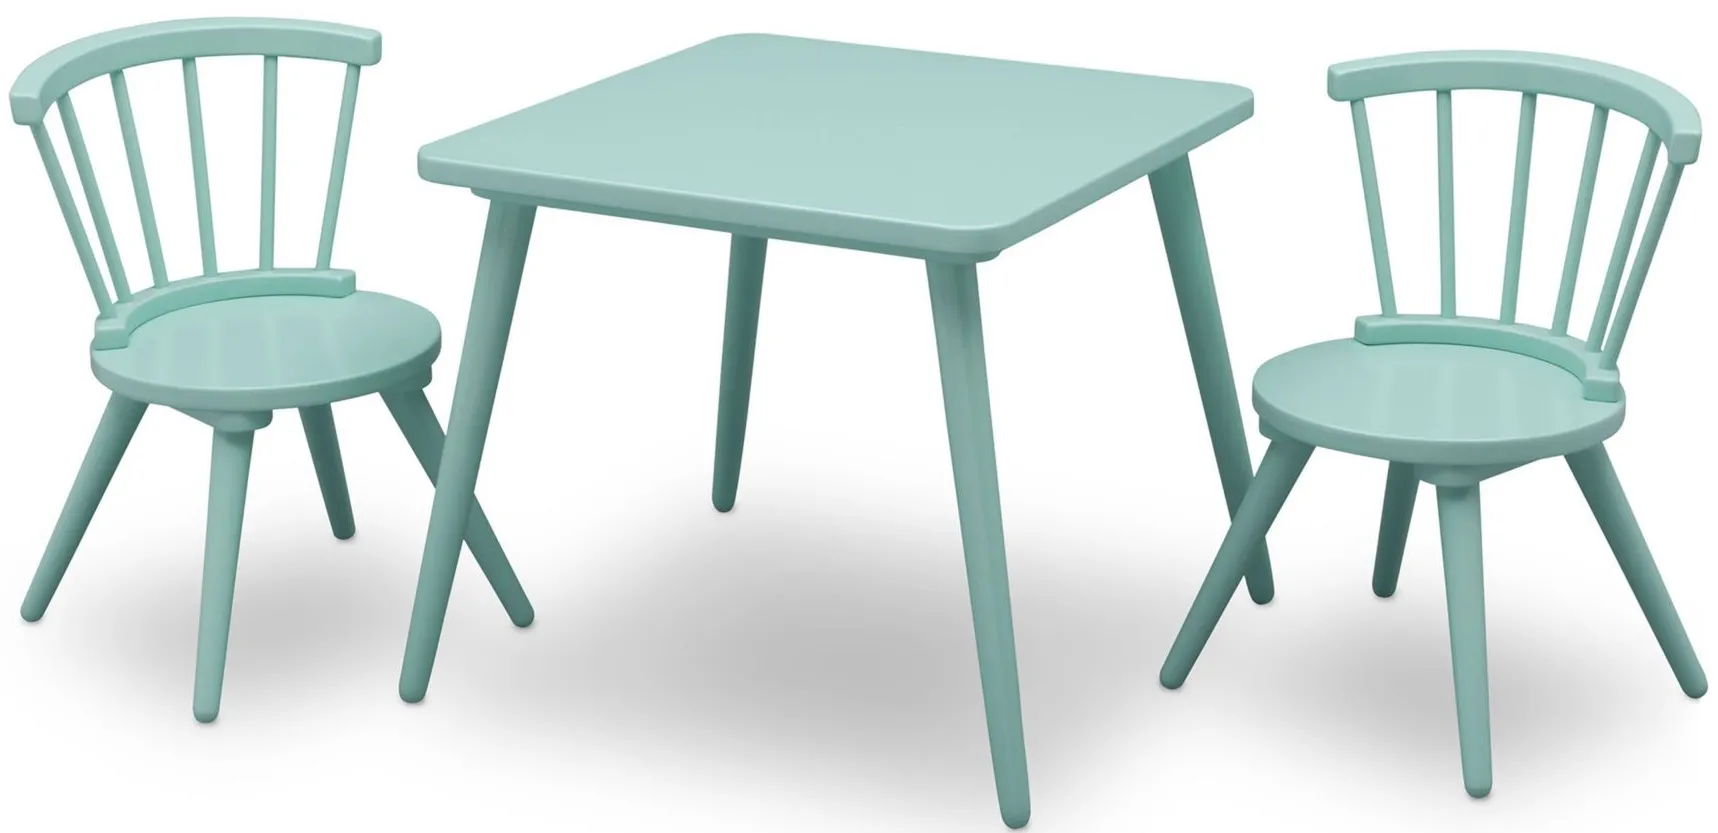 Windsor Kids Wood Table and Chair Set by Delta Children in Aqua by Delta Children